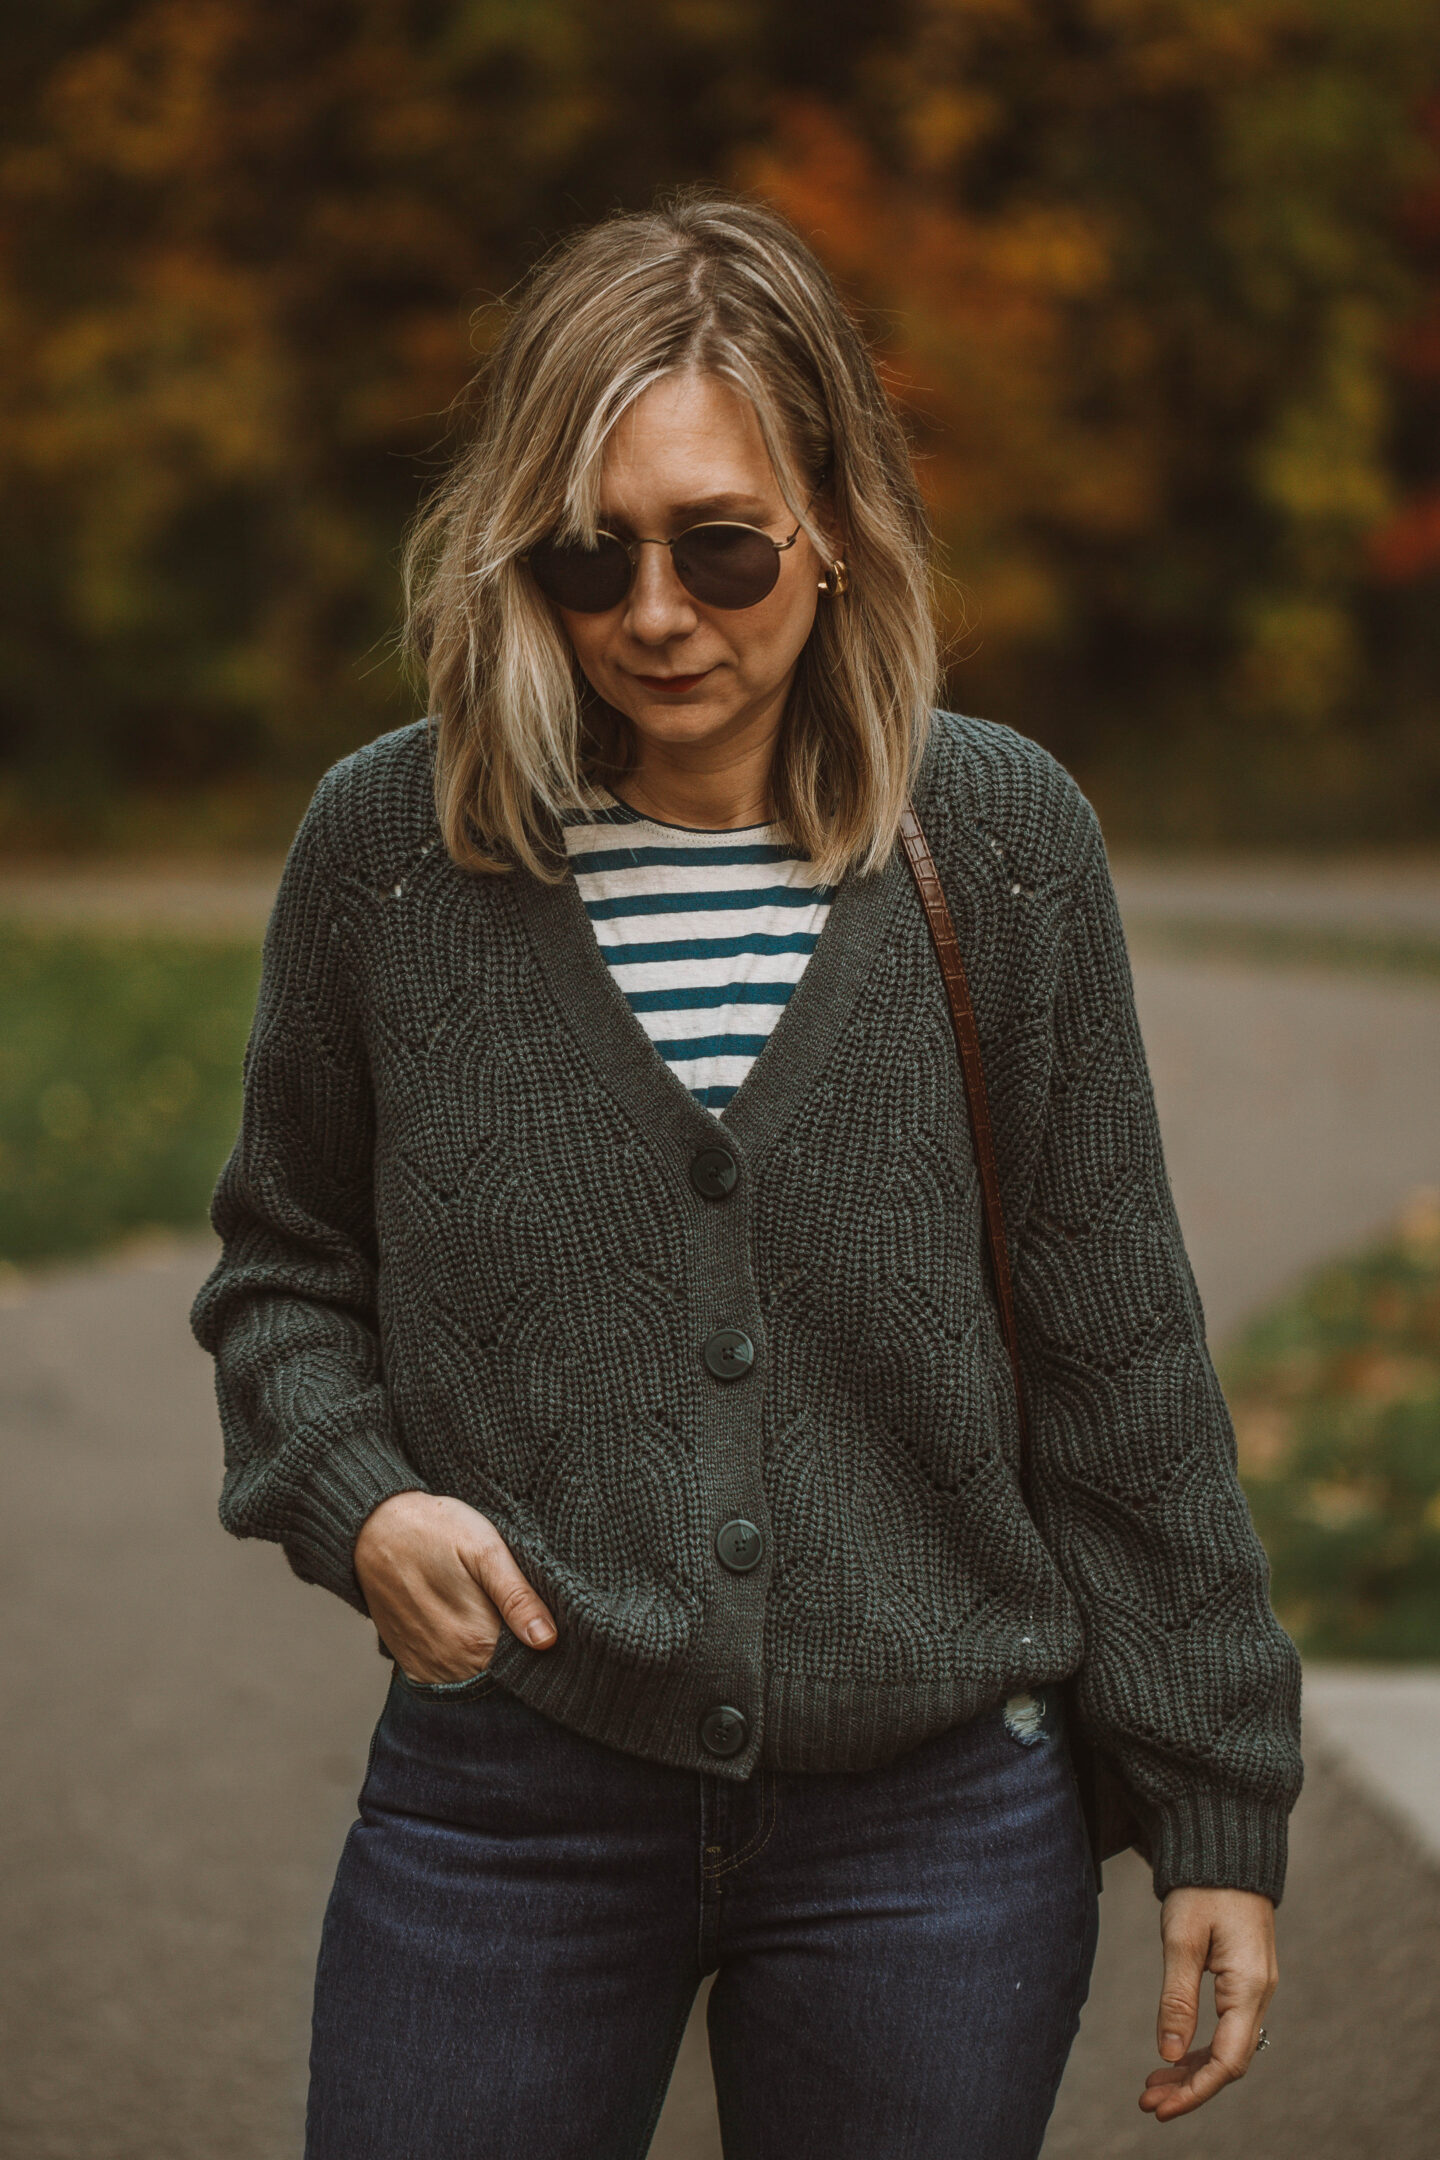 New in at Old Navy, What I'm Loving for Fall 2020